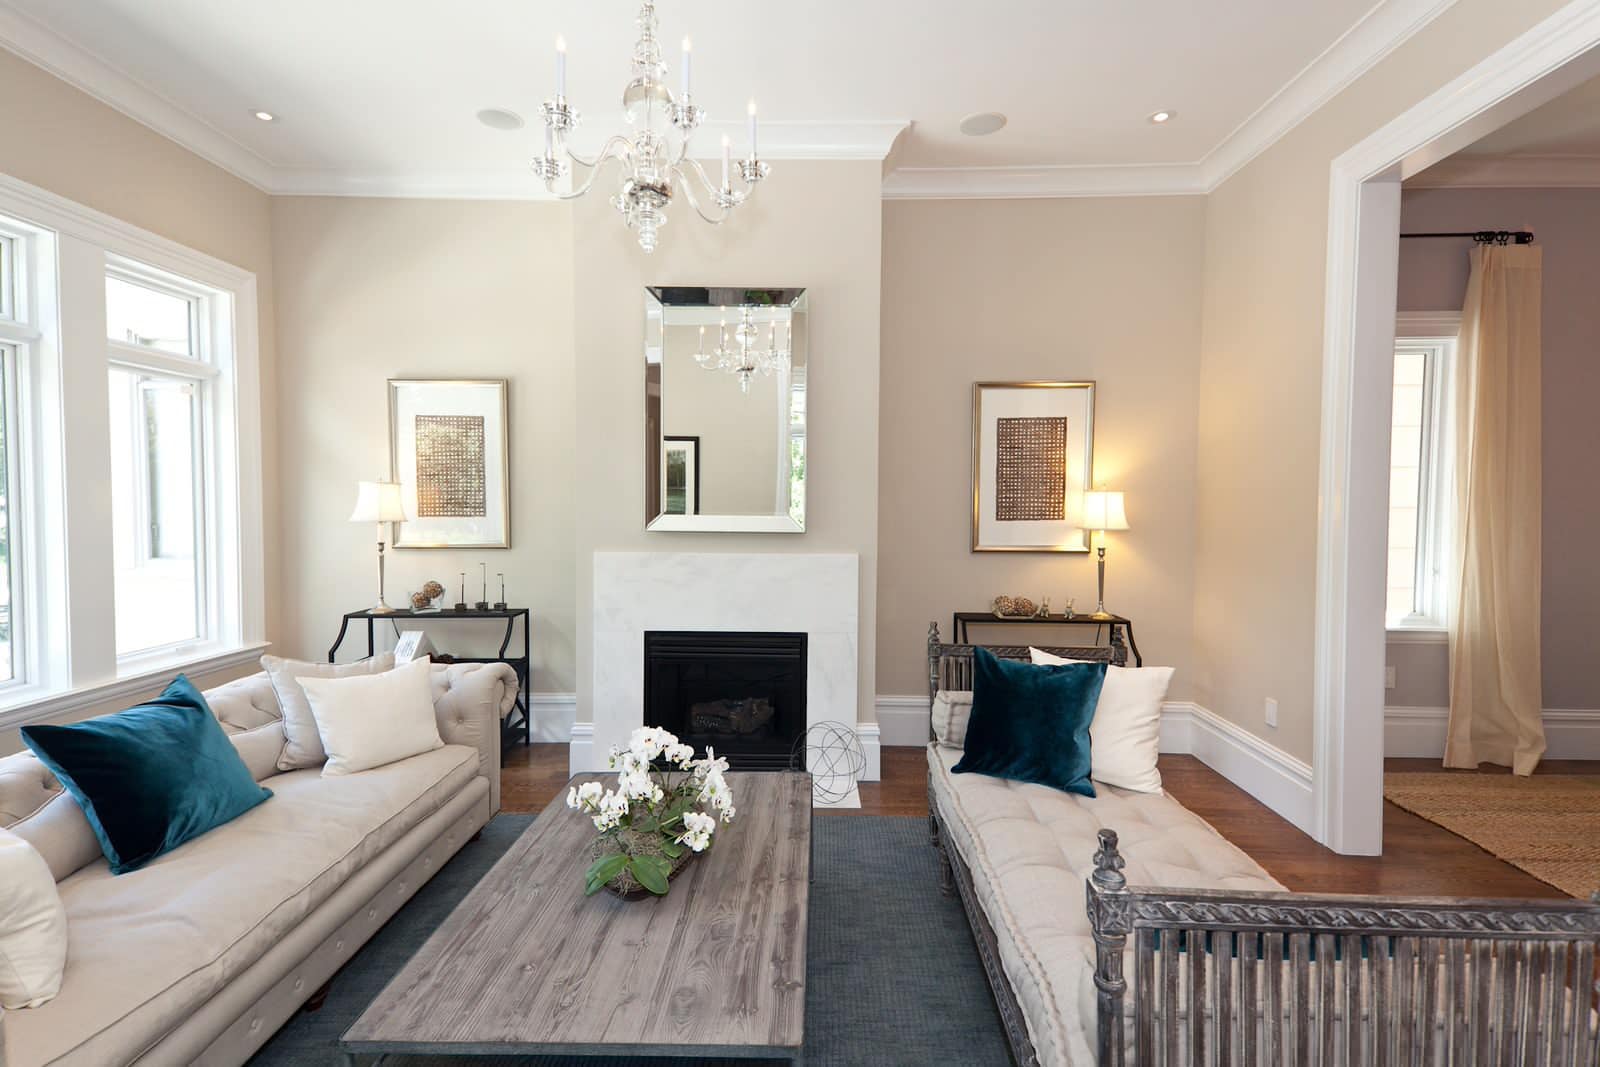 A living room filled with furniture and a fireplace with Benjamin Moore Edgecomb Gray paint color on the walls.